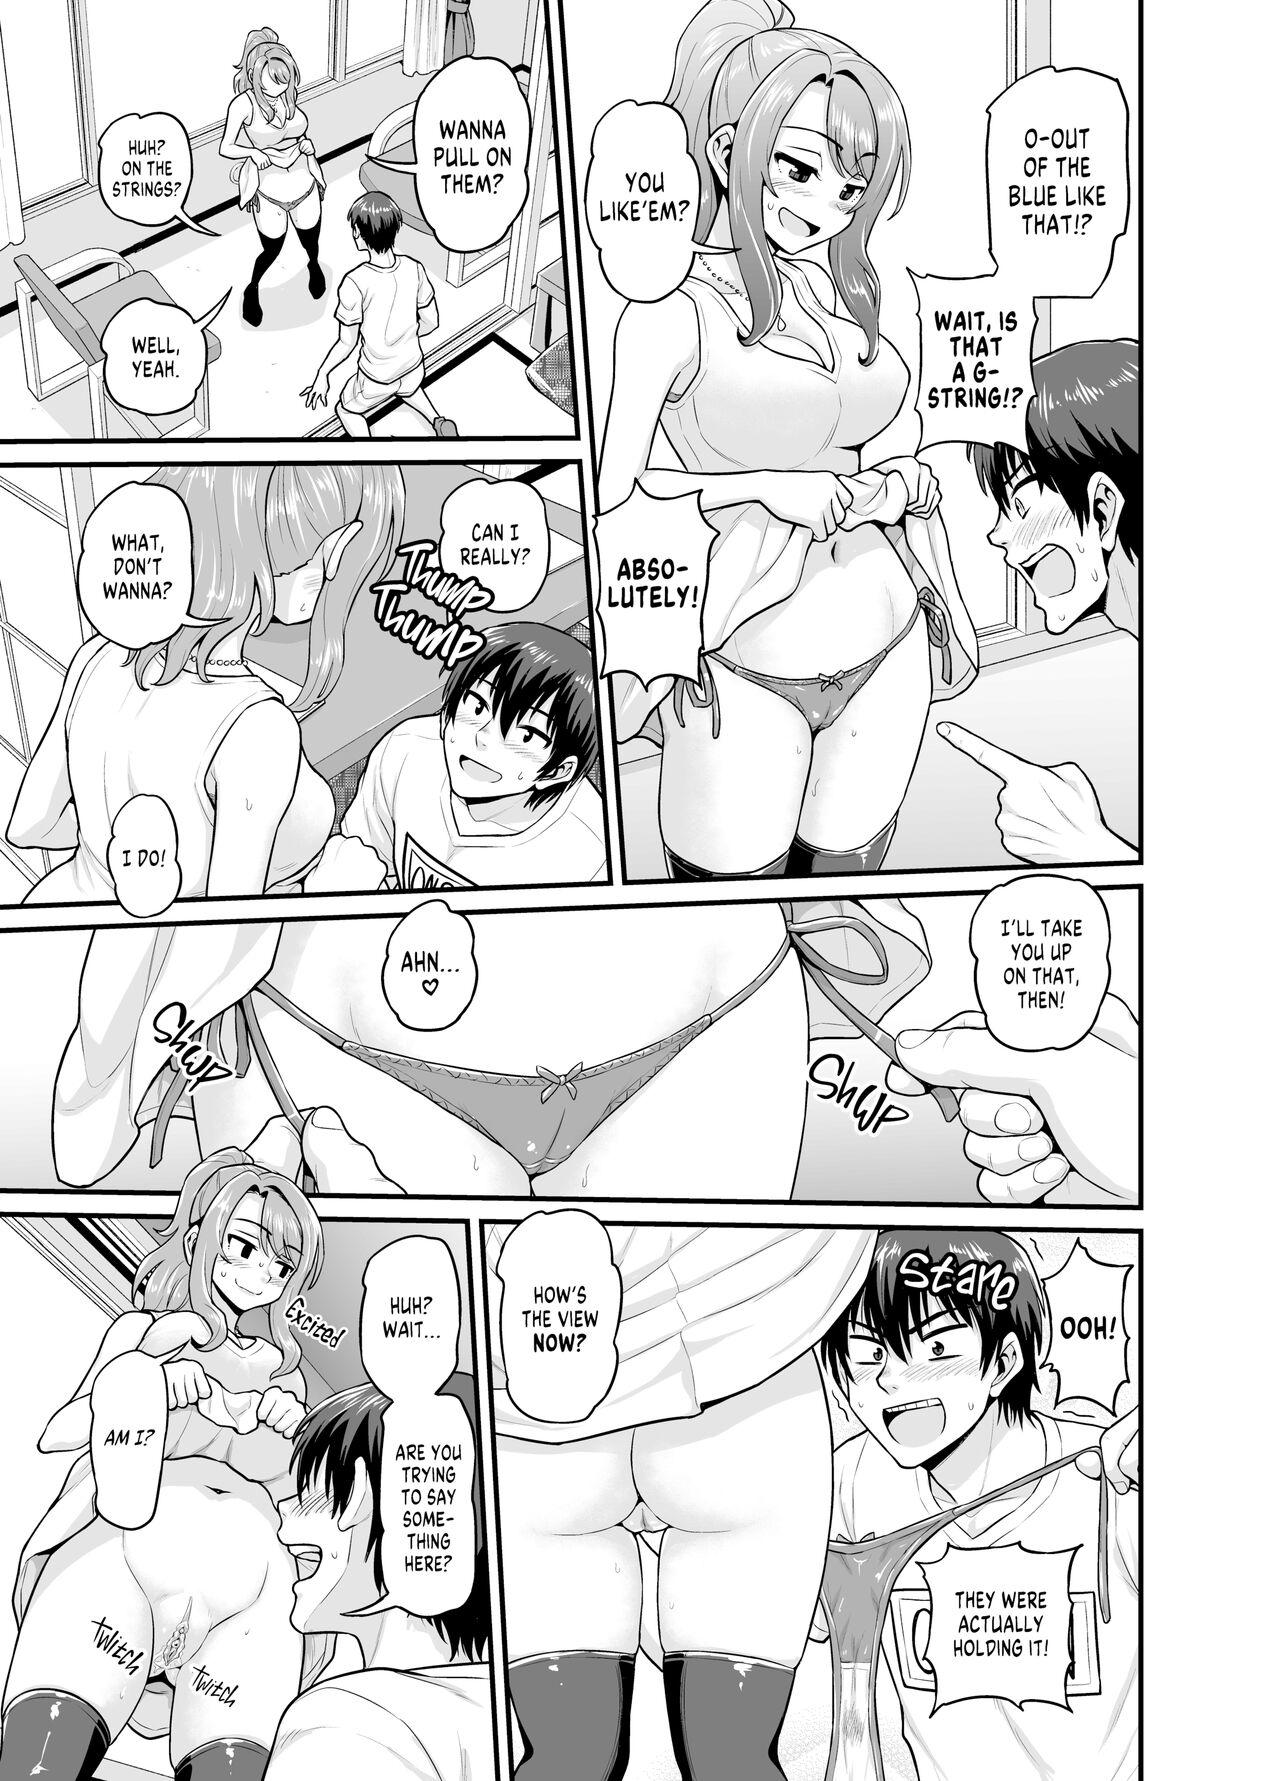 Chudai Getting it On With Your Gaming Buddy at the Hot Spring NTRVer. - Original Female Orgasm - Page 4